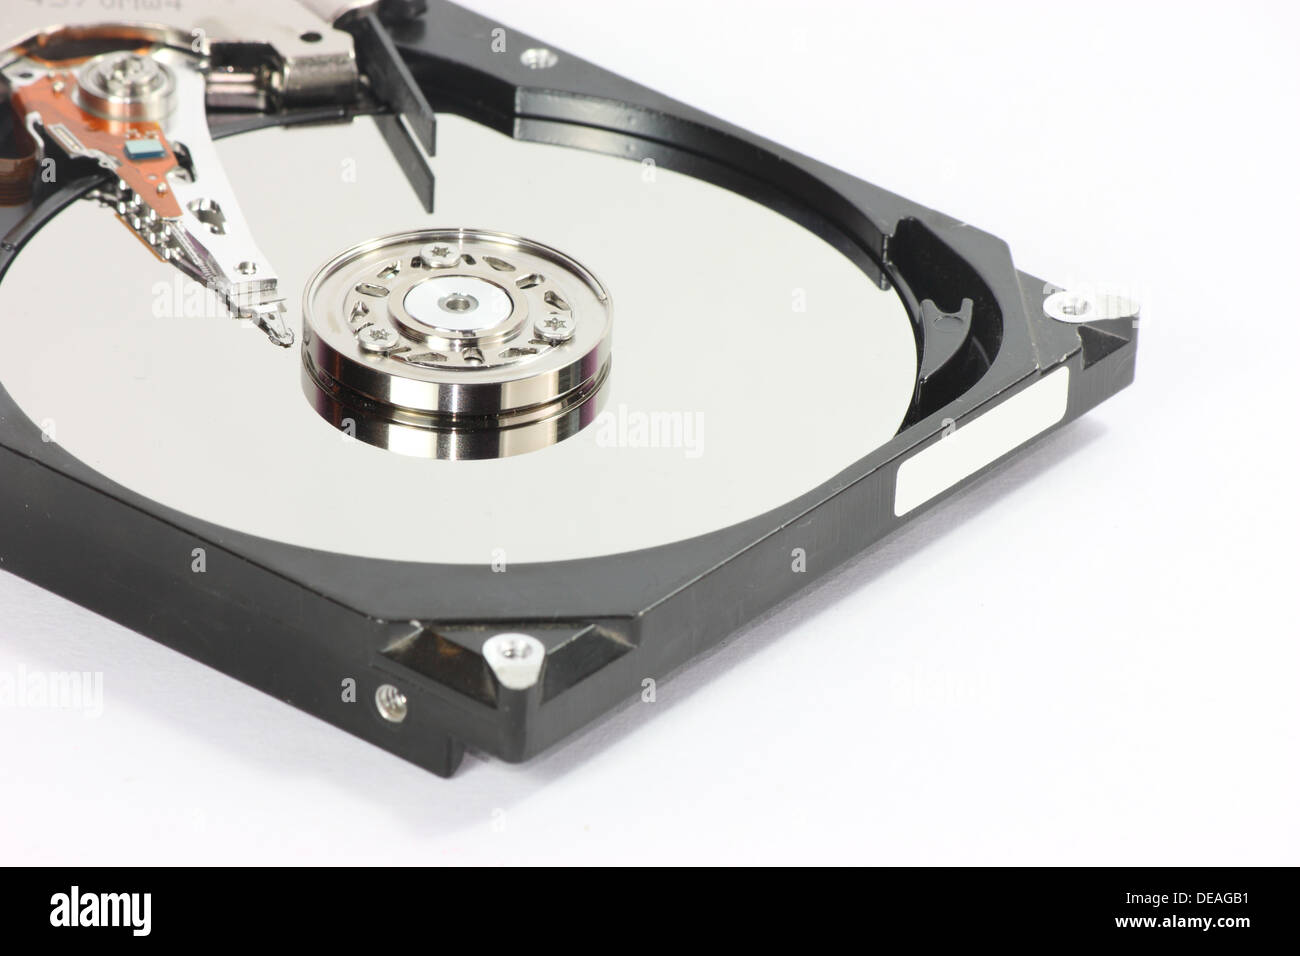 close up of sata hard disk on white backgound Stock Photo